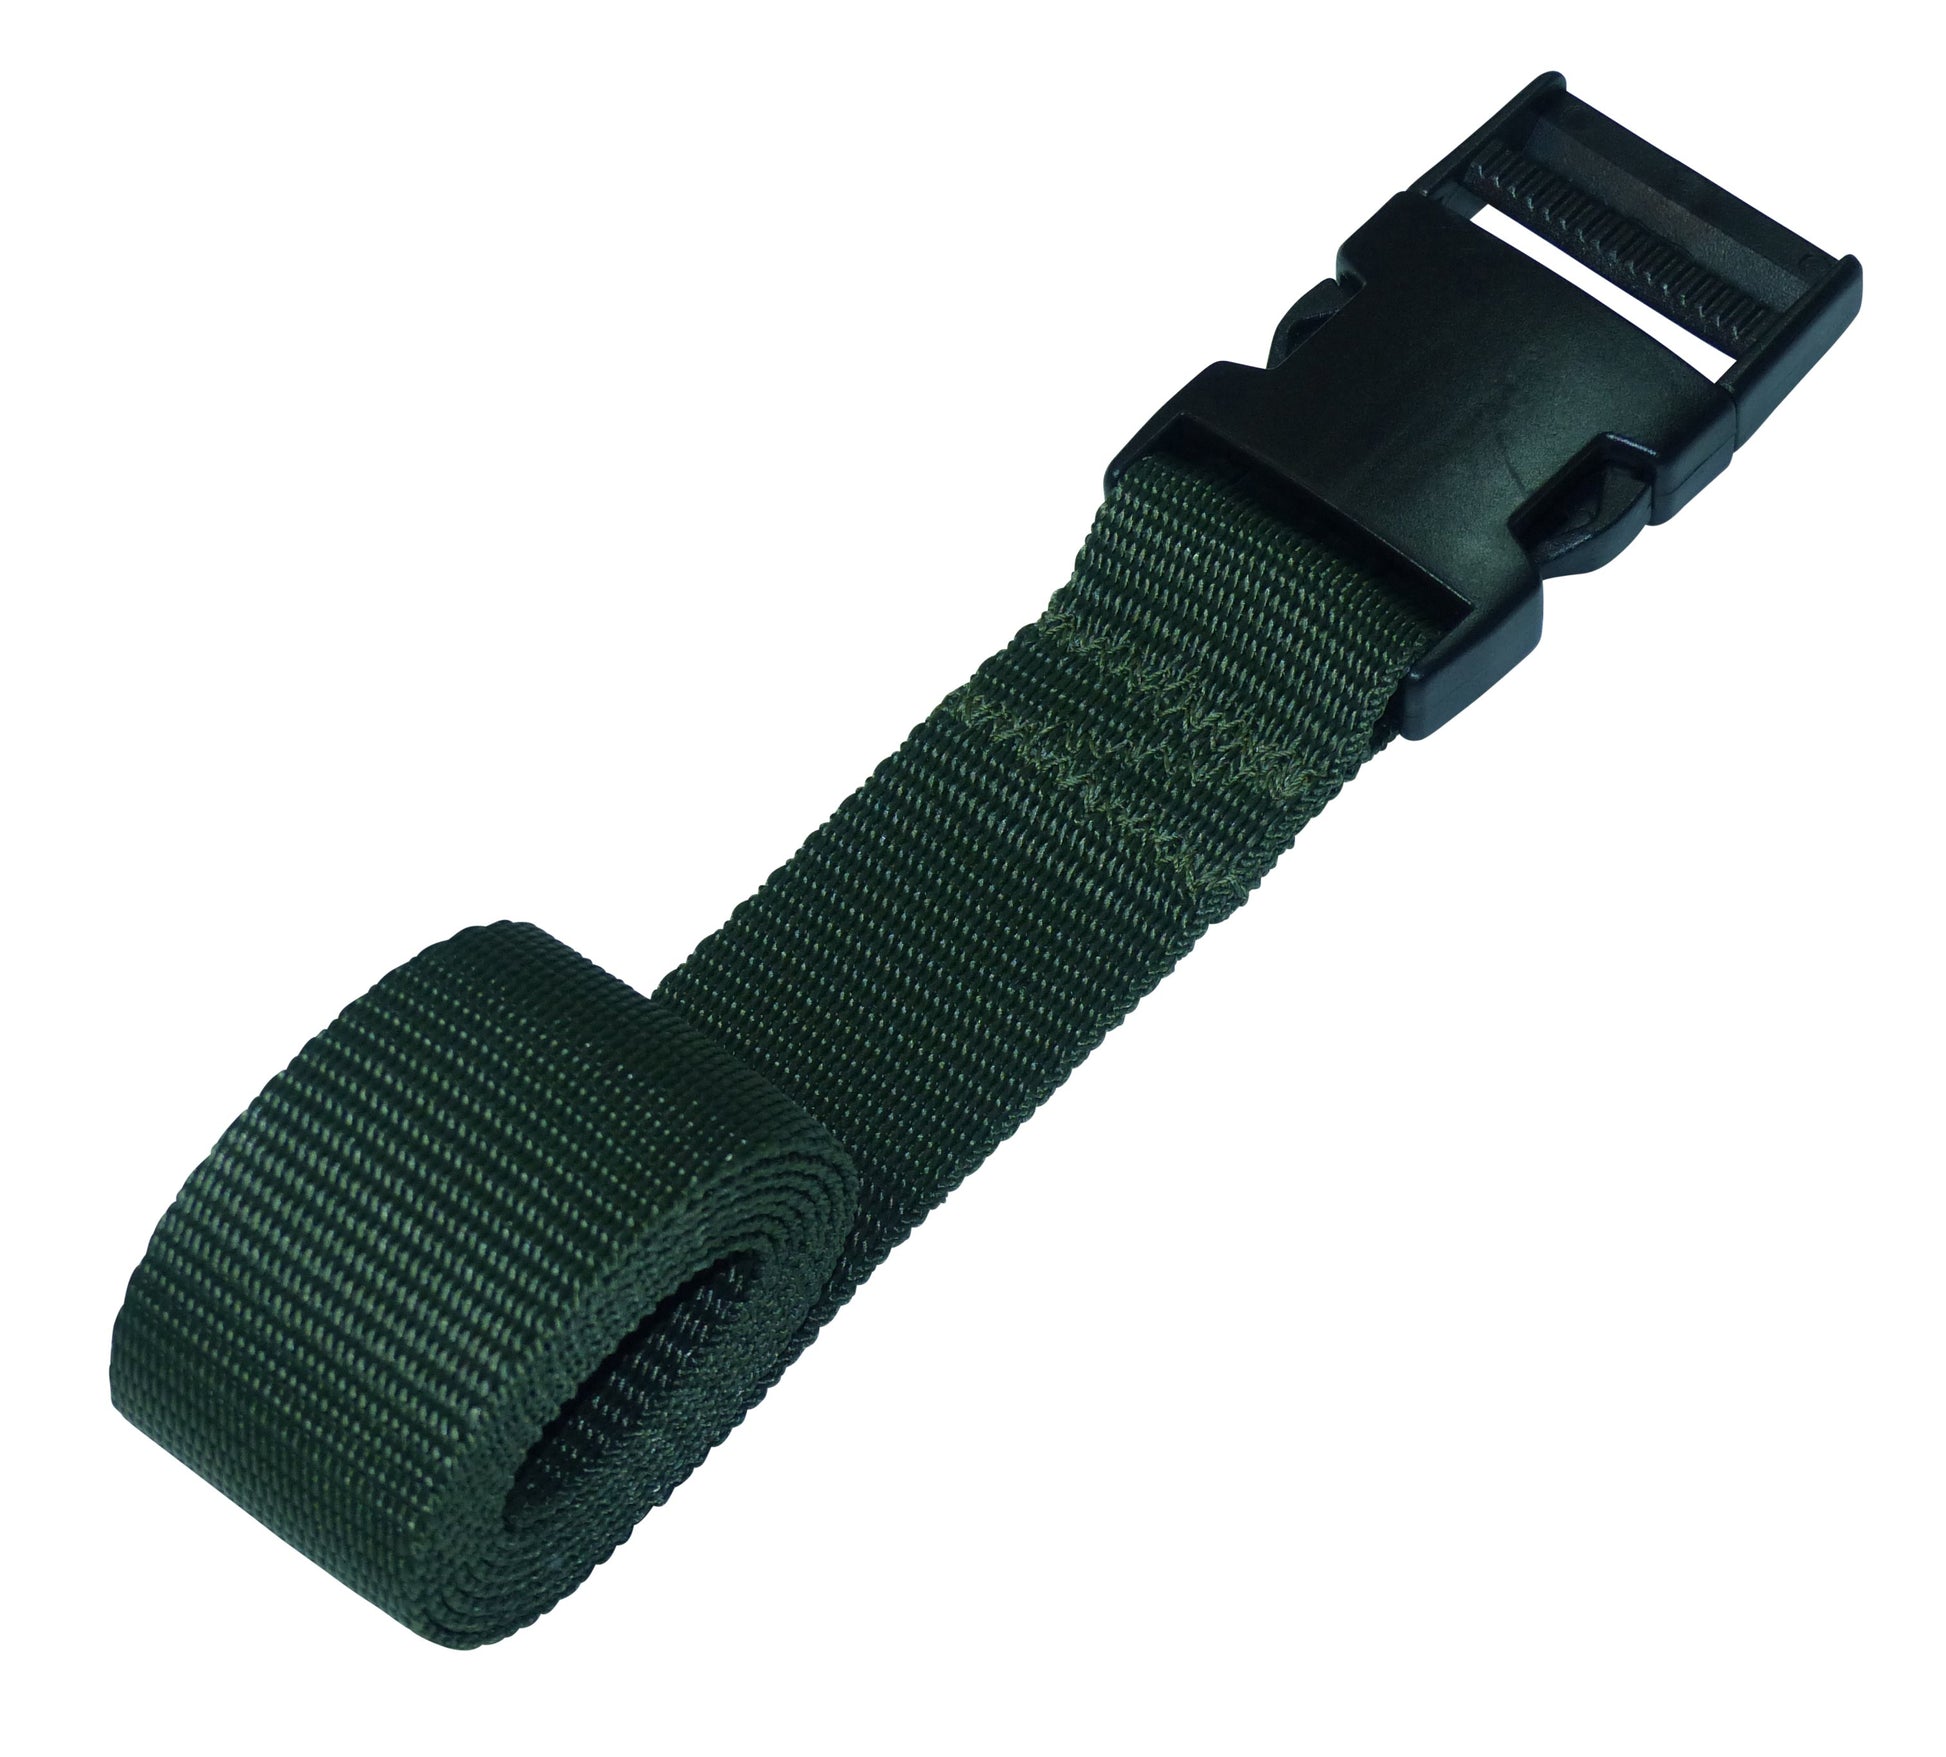 Benristraps 38mm Webbing Strap with Quick Release Buckle in forest green